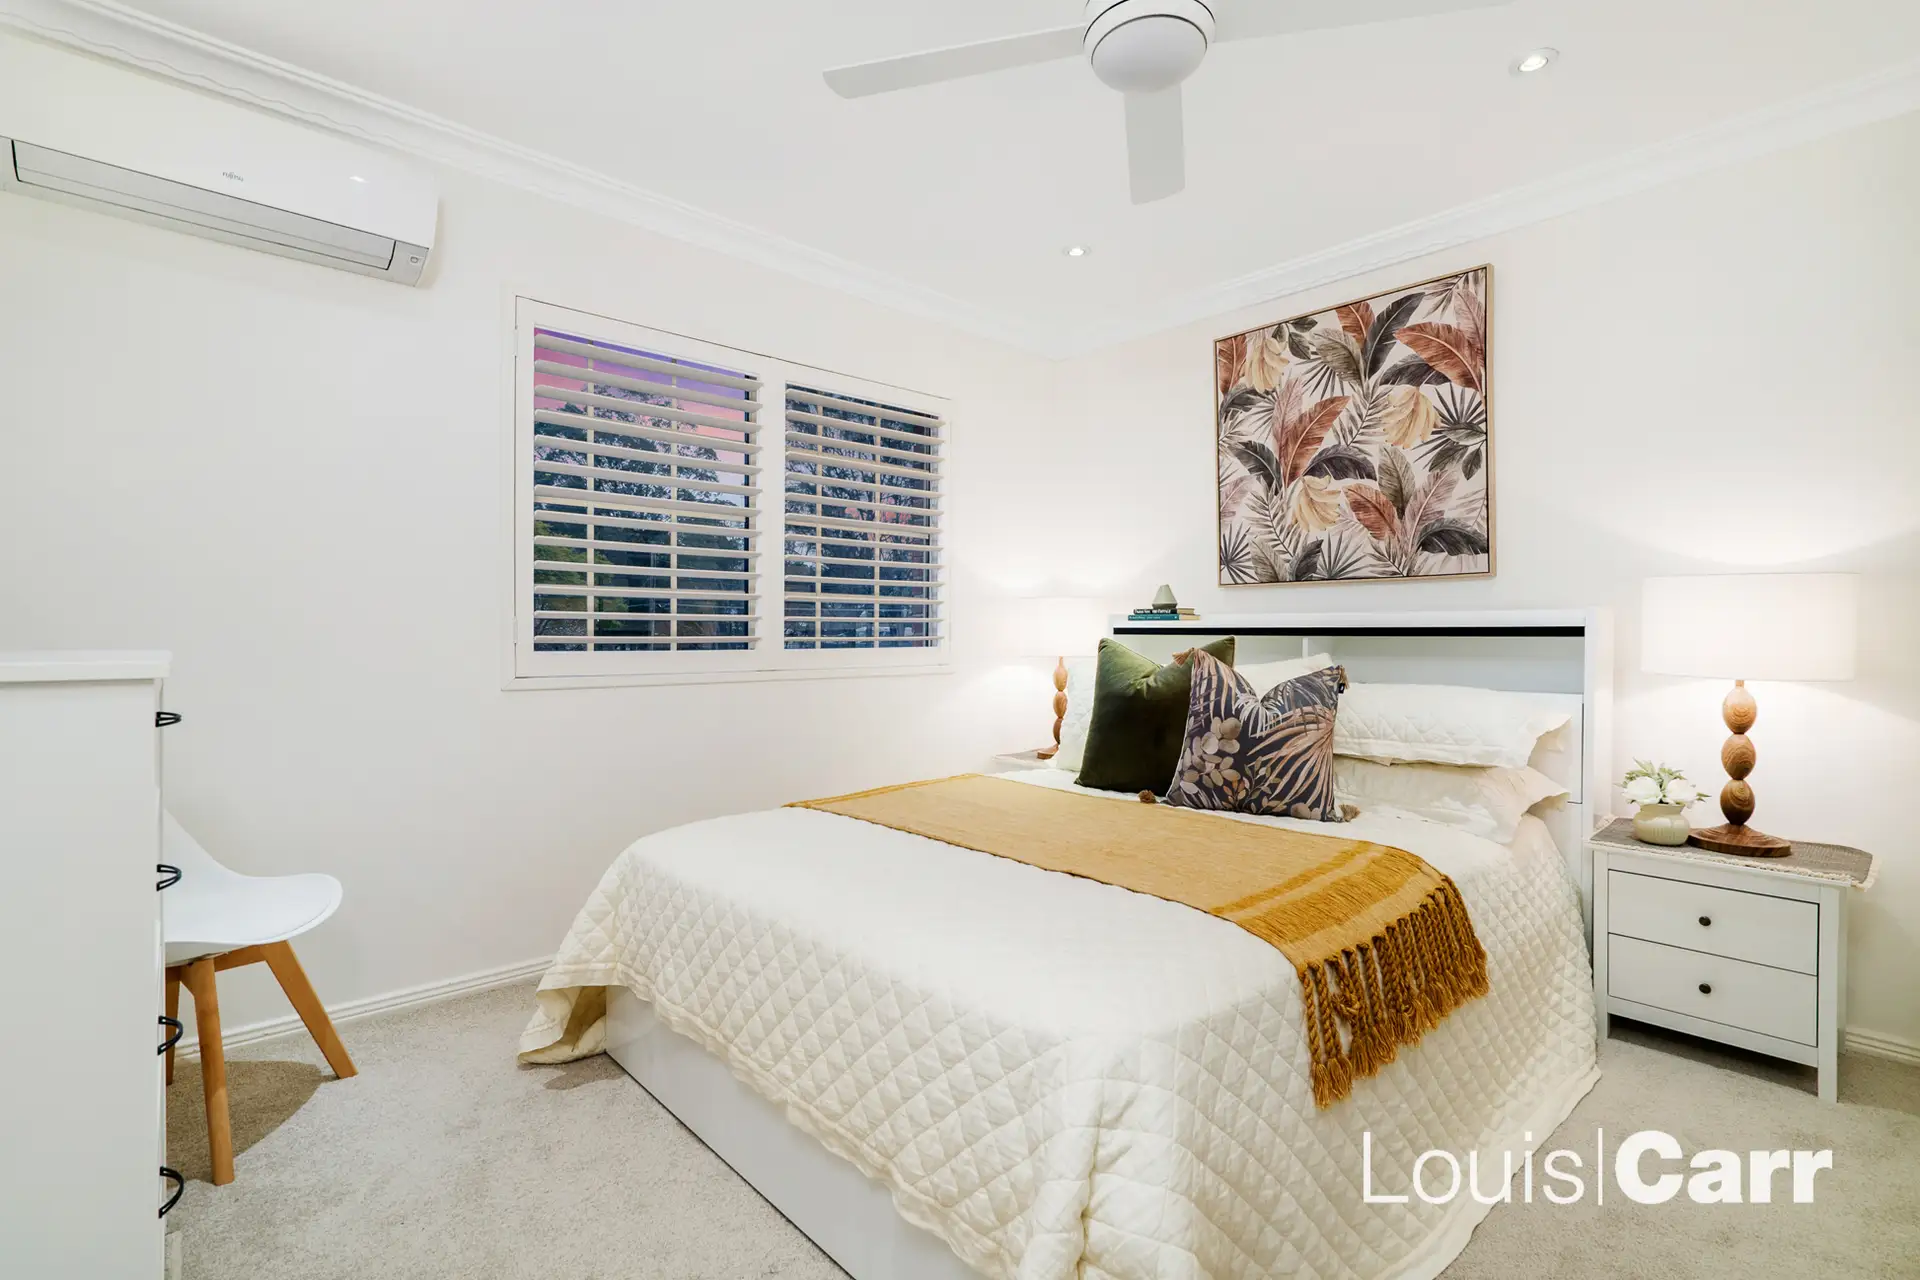 Photo #5: 1/165 Victoria Road, West Pennant Hills - Sold by Louis Carr Real Estate